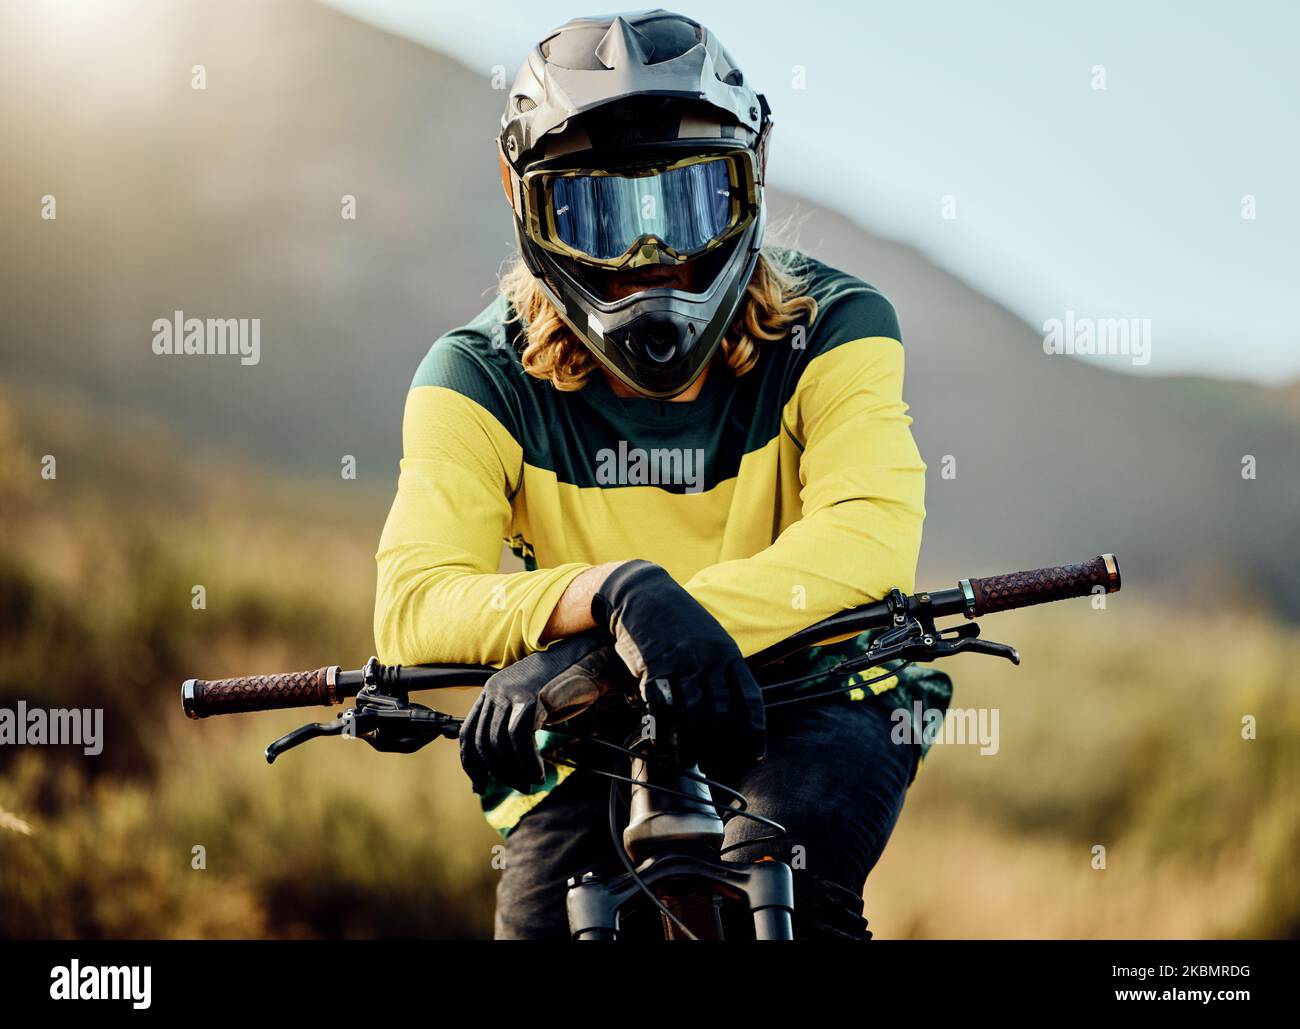 Dirt bike, bicycle and athlete portrait to ride in competitive cycling competition for adventure. Extreme sport, moto and rider waiting for cycle Stock Photo